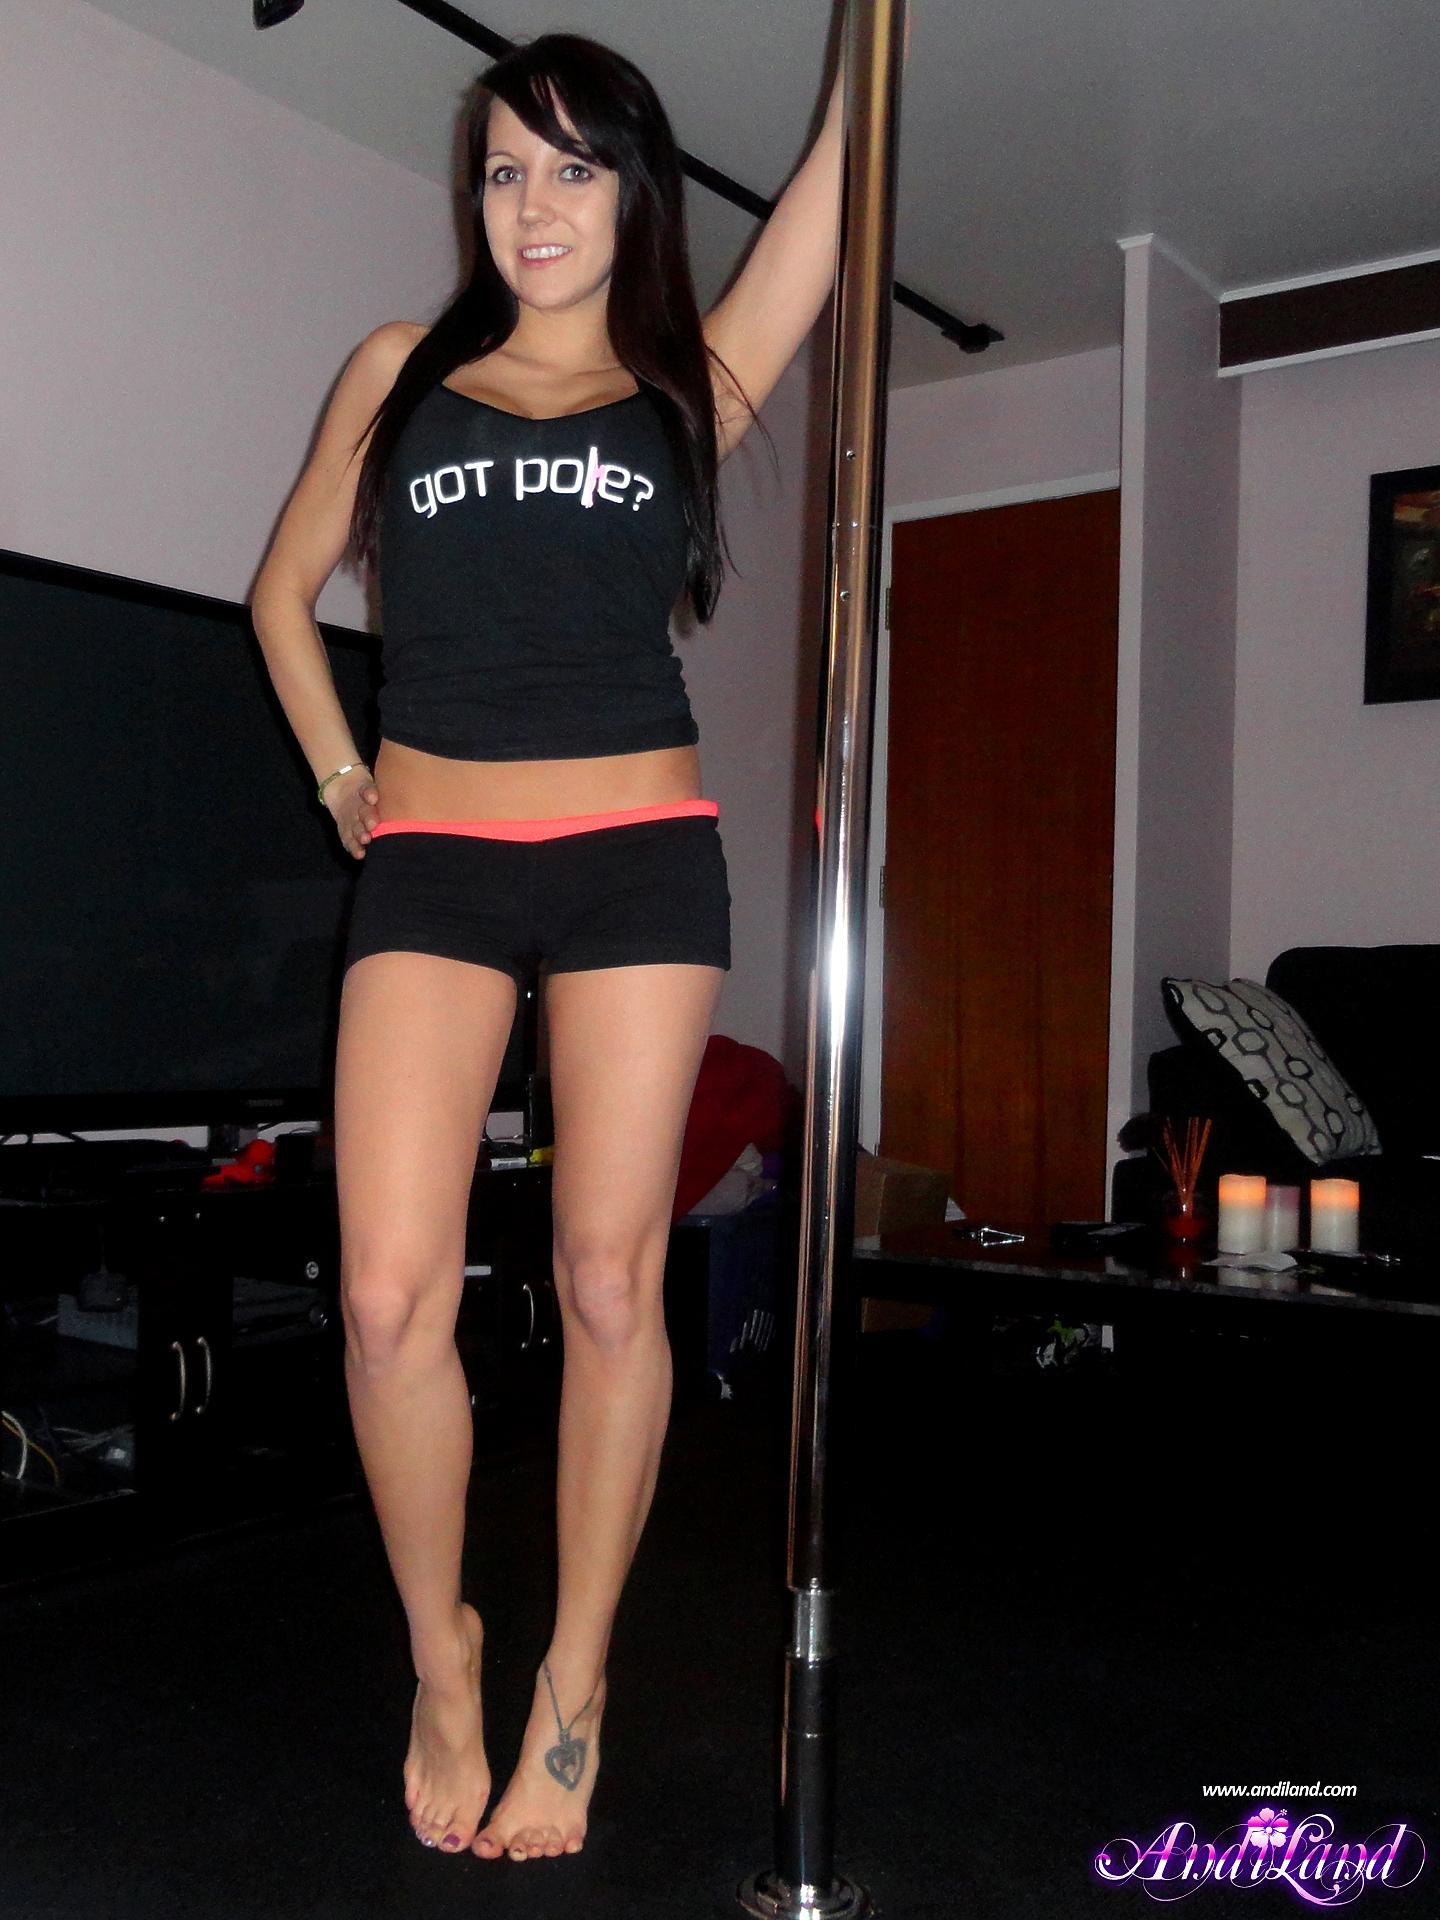 Pictures of hot teen Andi Land working the stripper pole #53141697